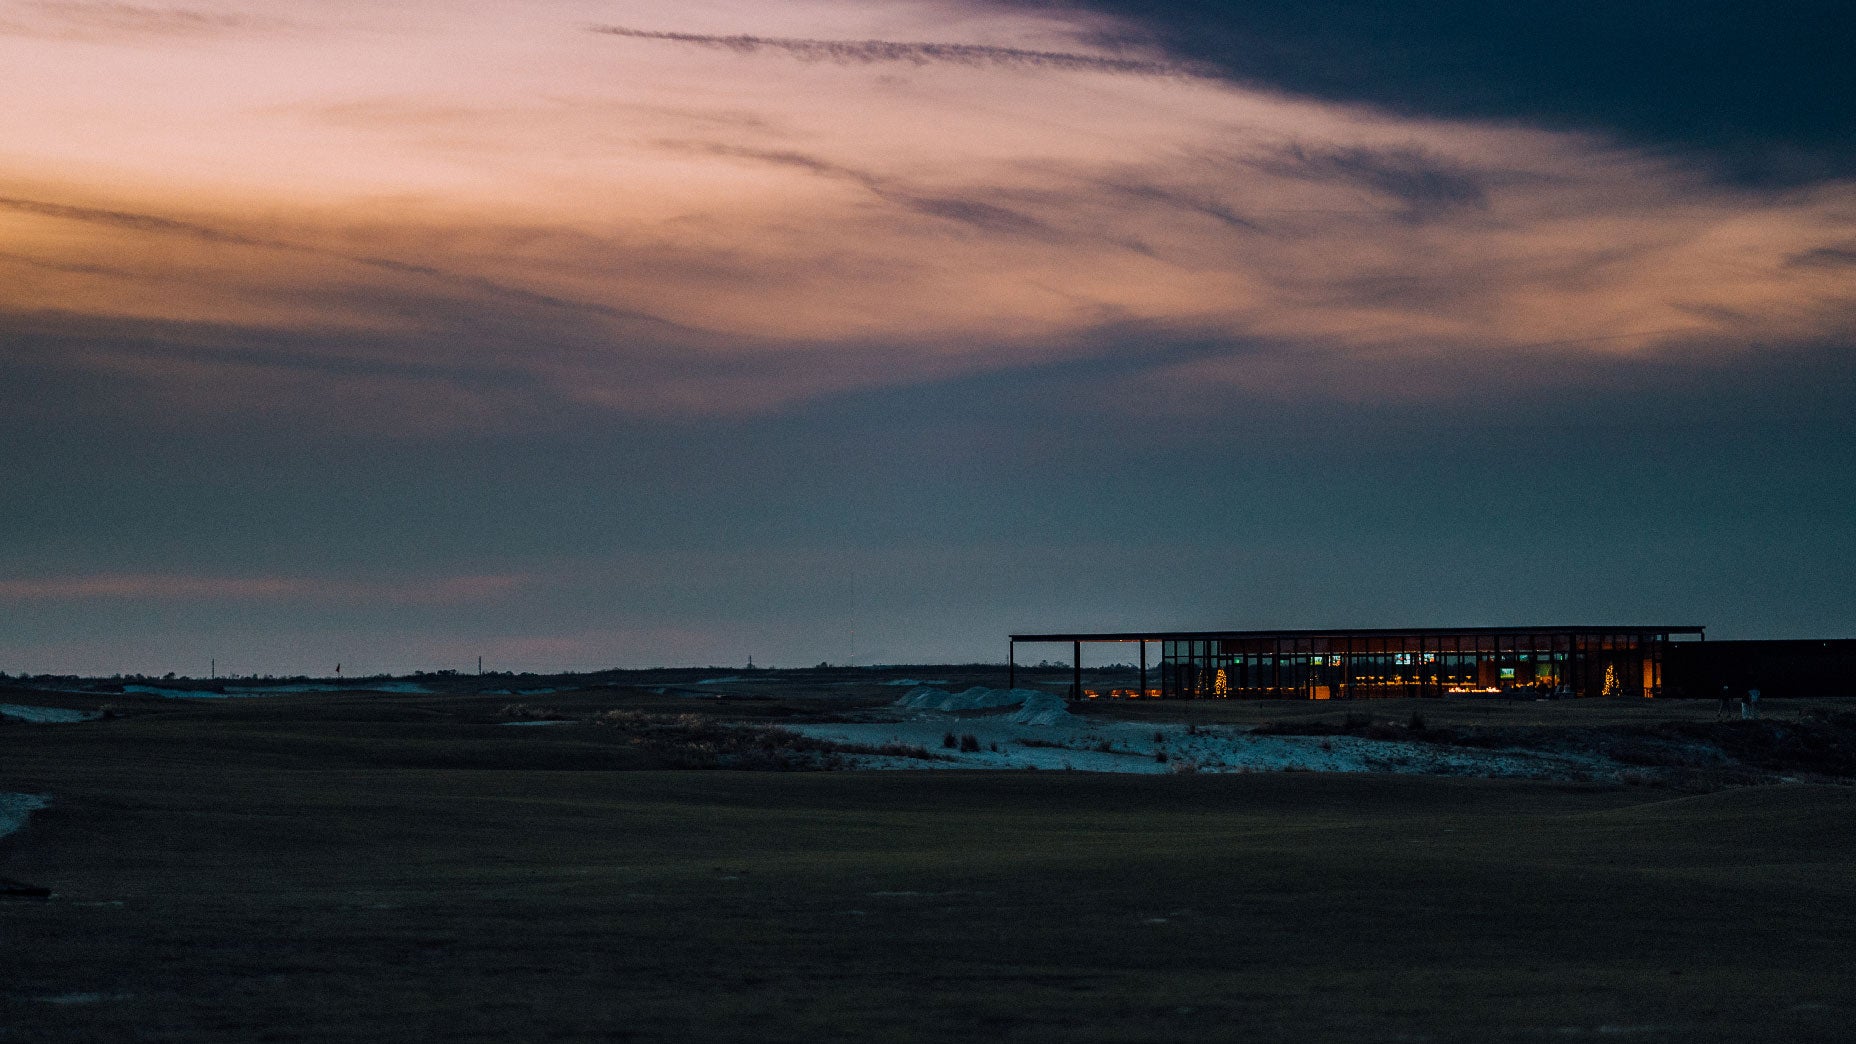 The modern clubhouse at dusk at Streamsong